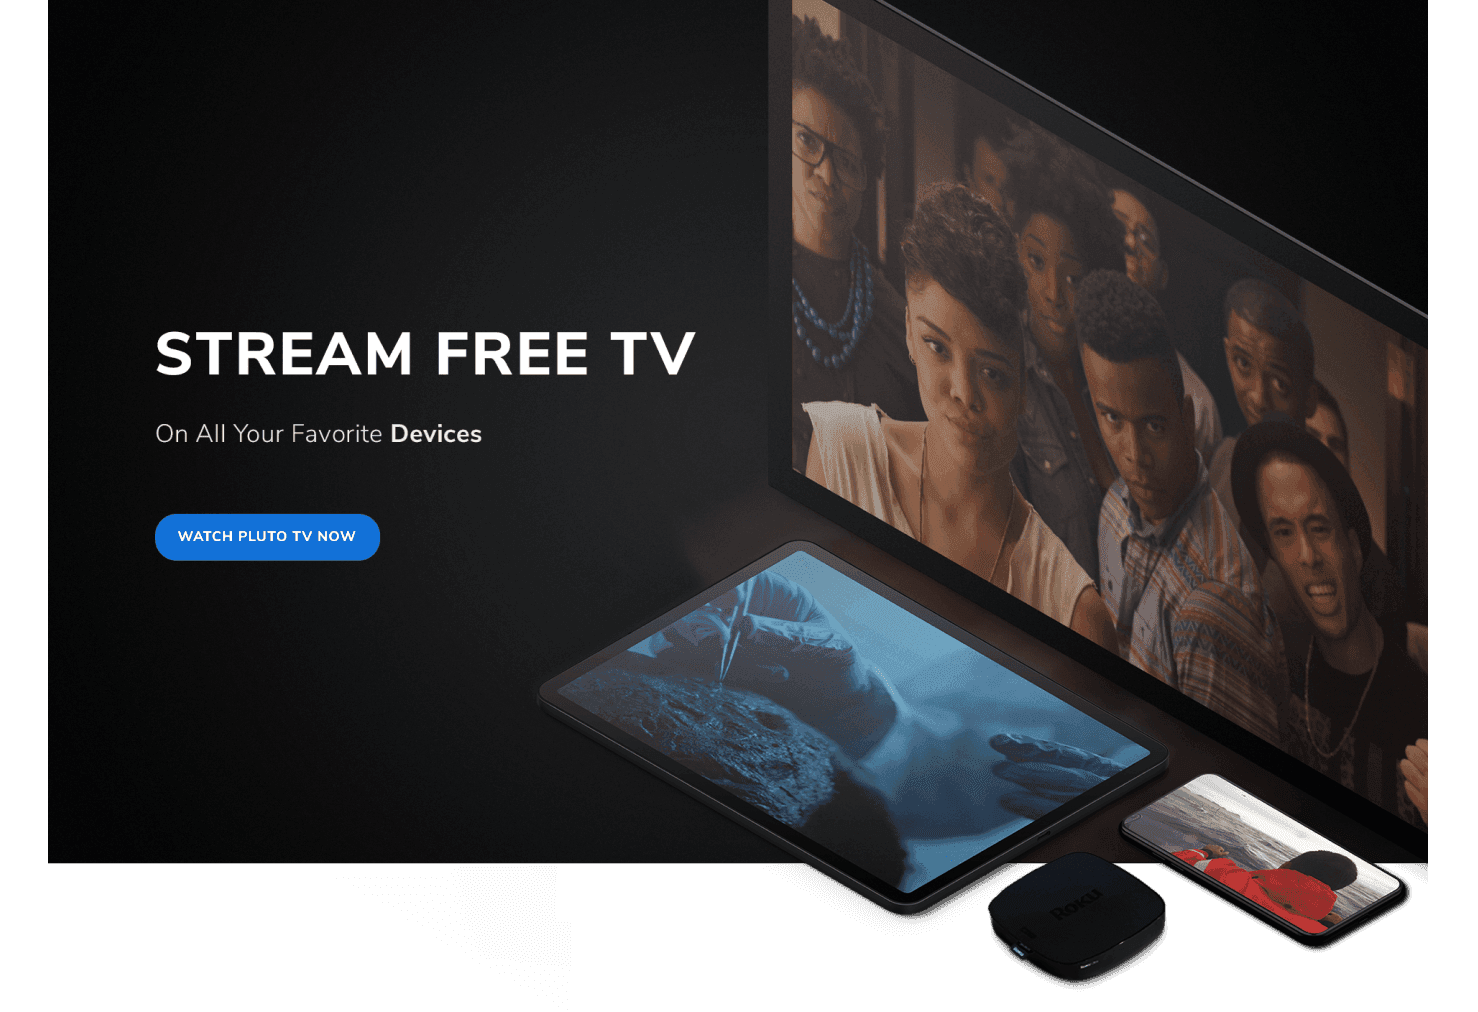 Stream TV on all your favorite devices